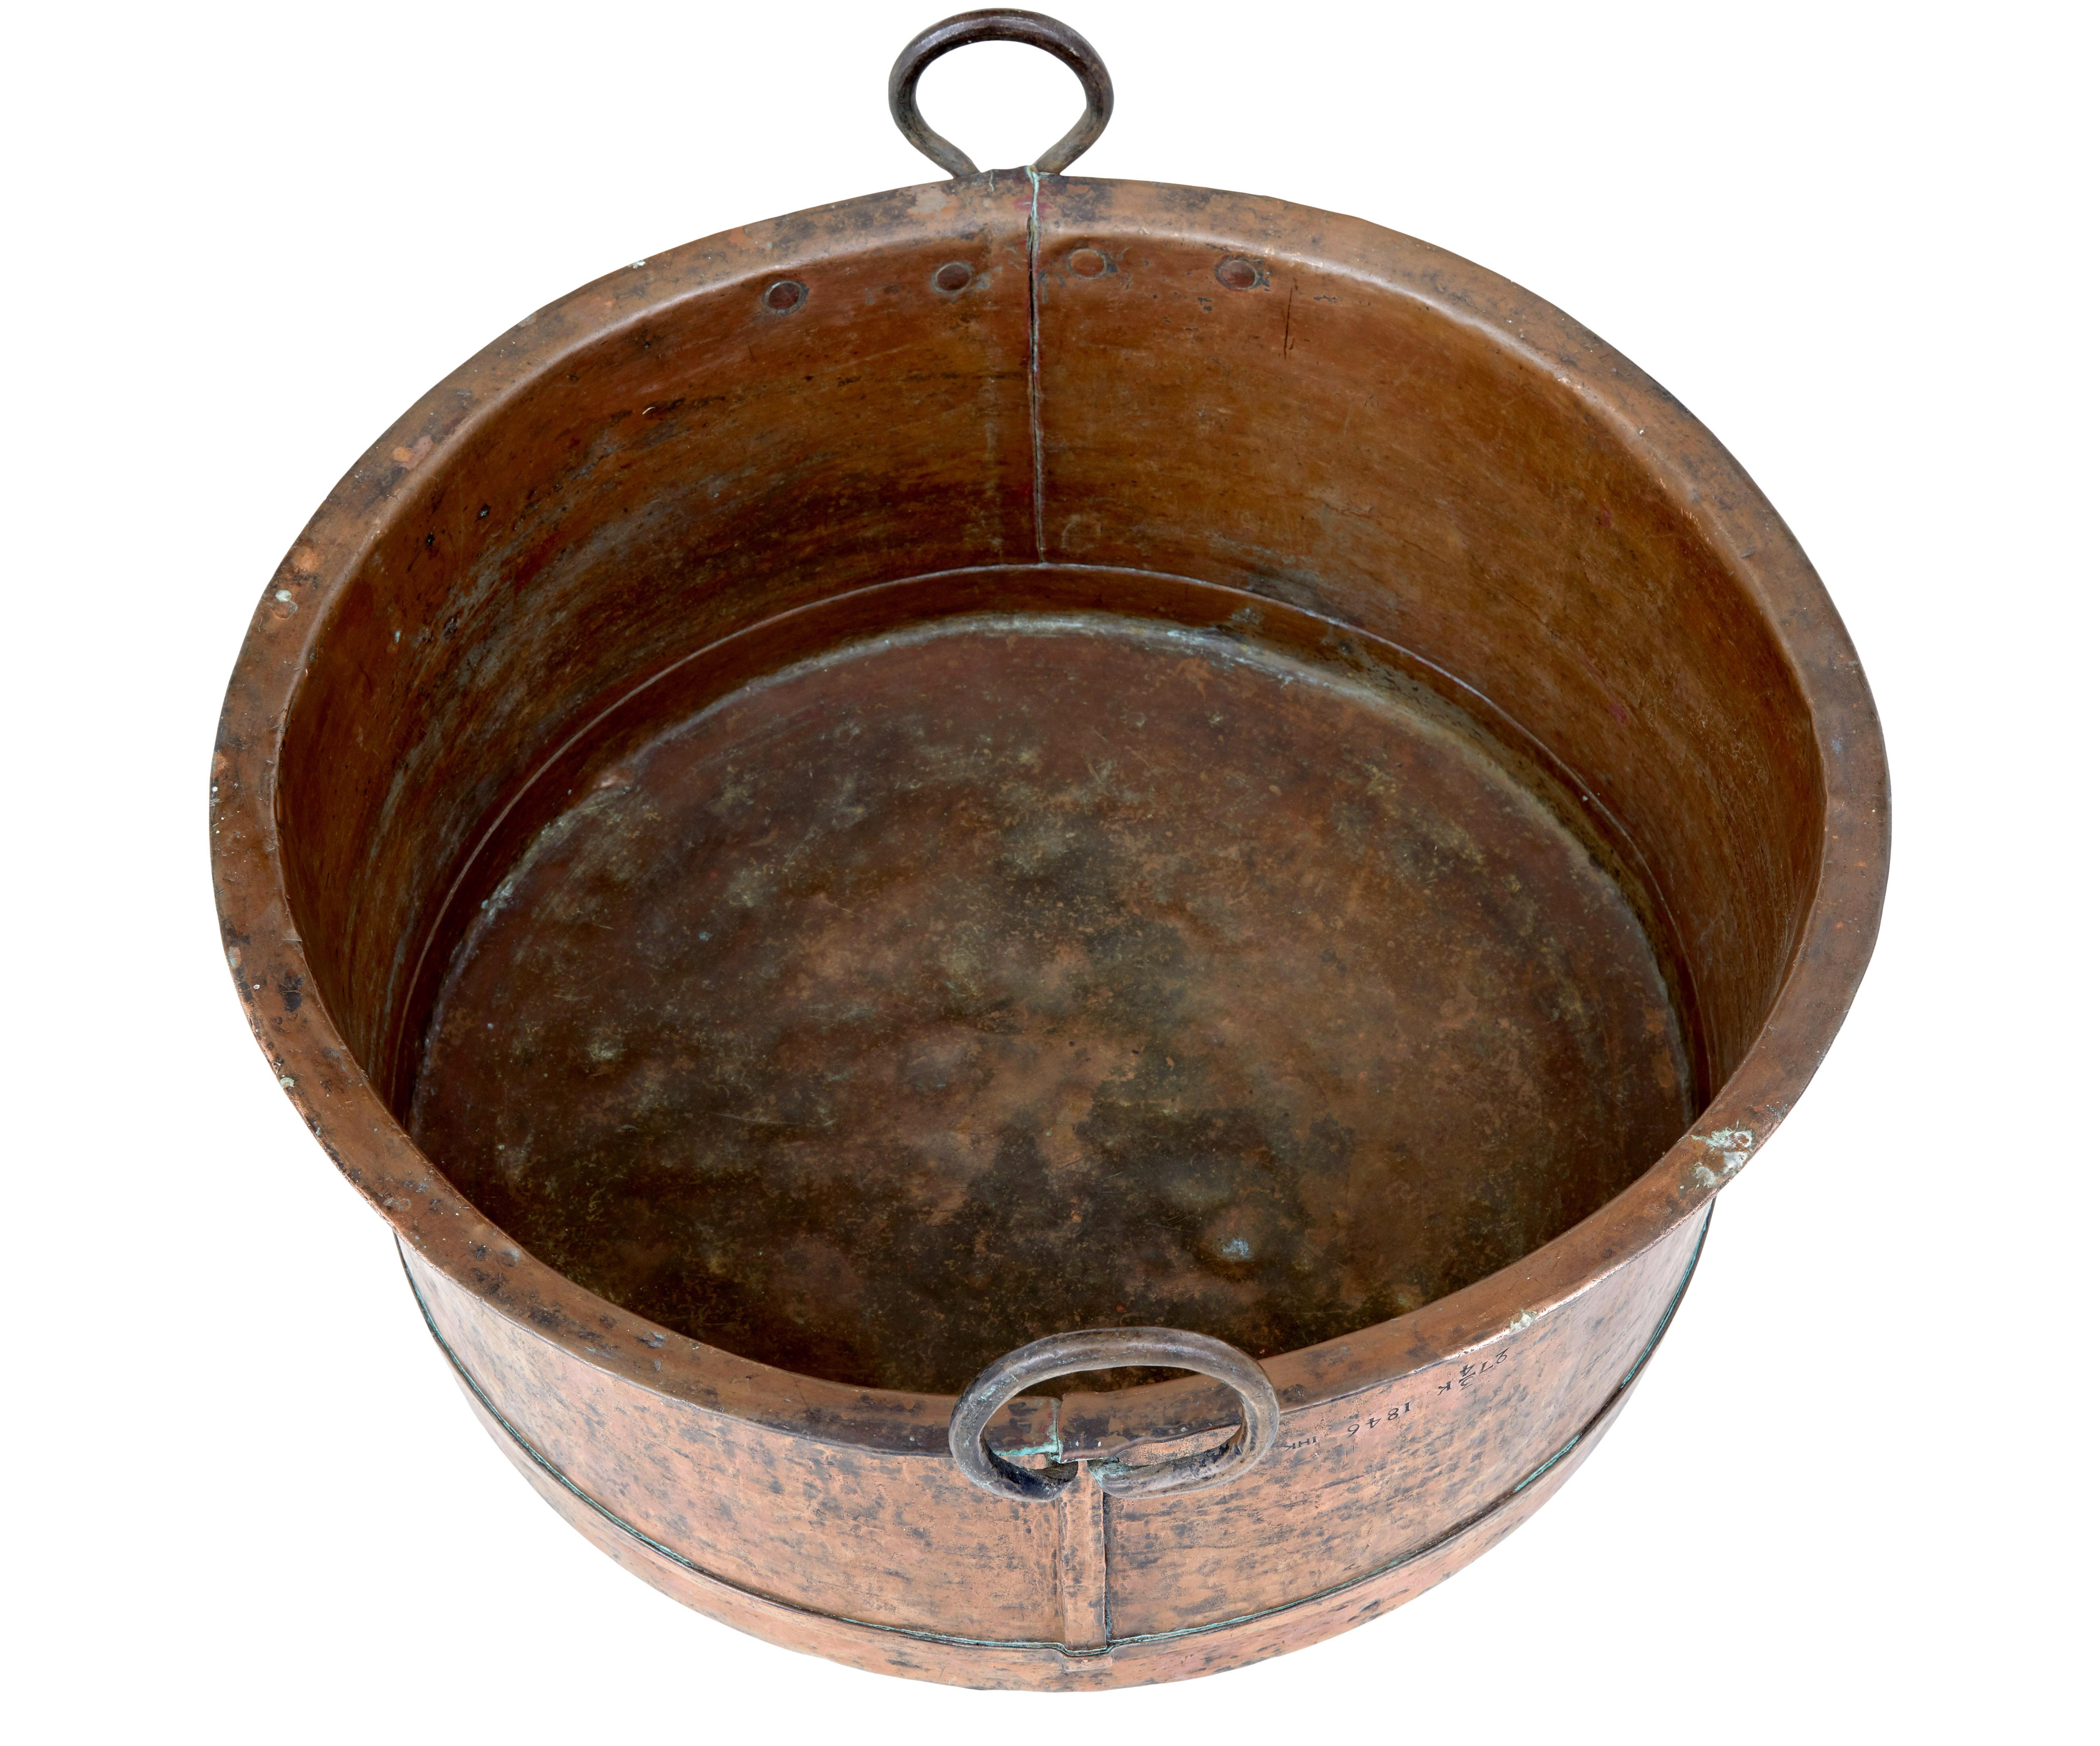 Swedish Mid 19th century copper cooking vessel For Sale